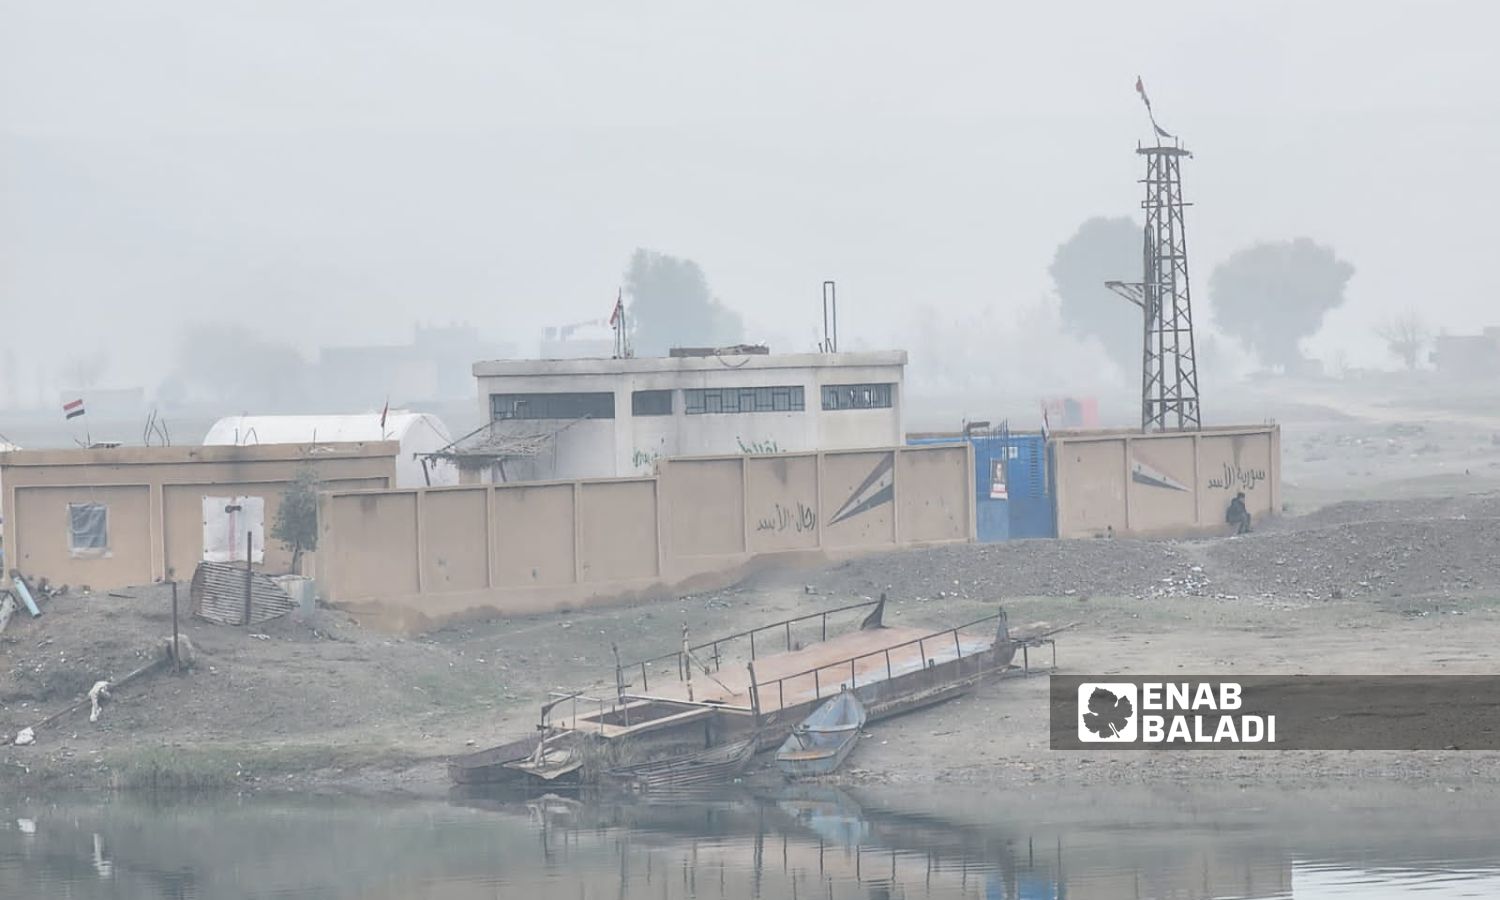 A regime forces headquarters in the town of al-Duwair, east of Deir Ezzor on the western bank of the Euphrates River - January 16, 2024 (Enab Baladi/Obada al-Sheikh)